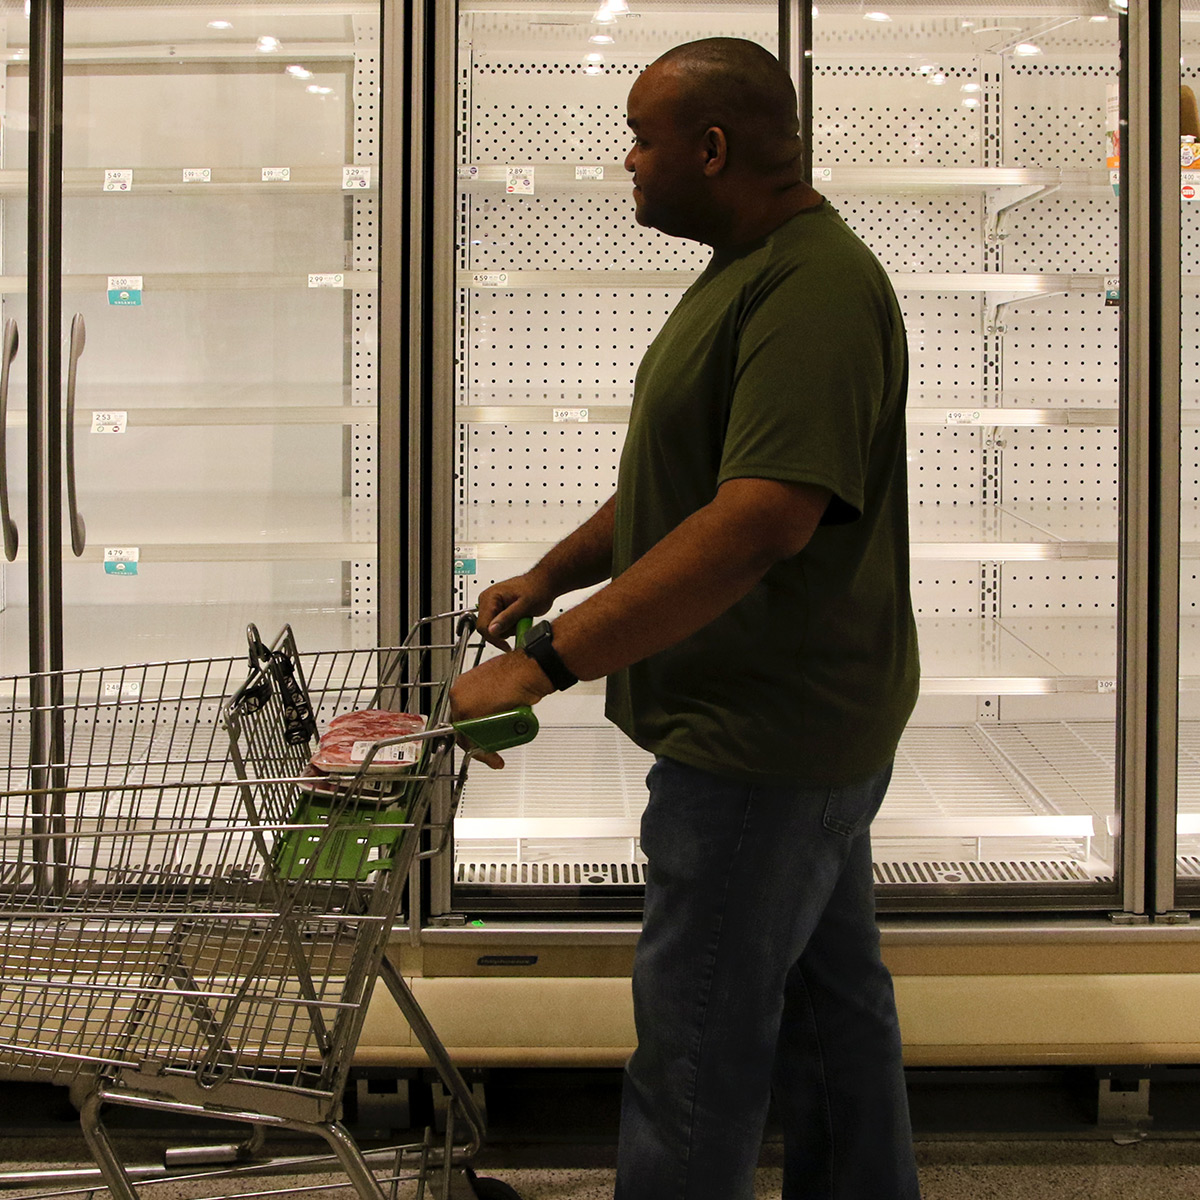 Man shopping in empty freezer section